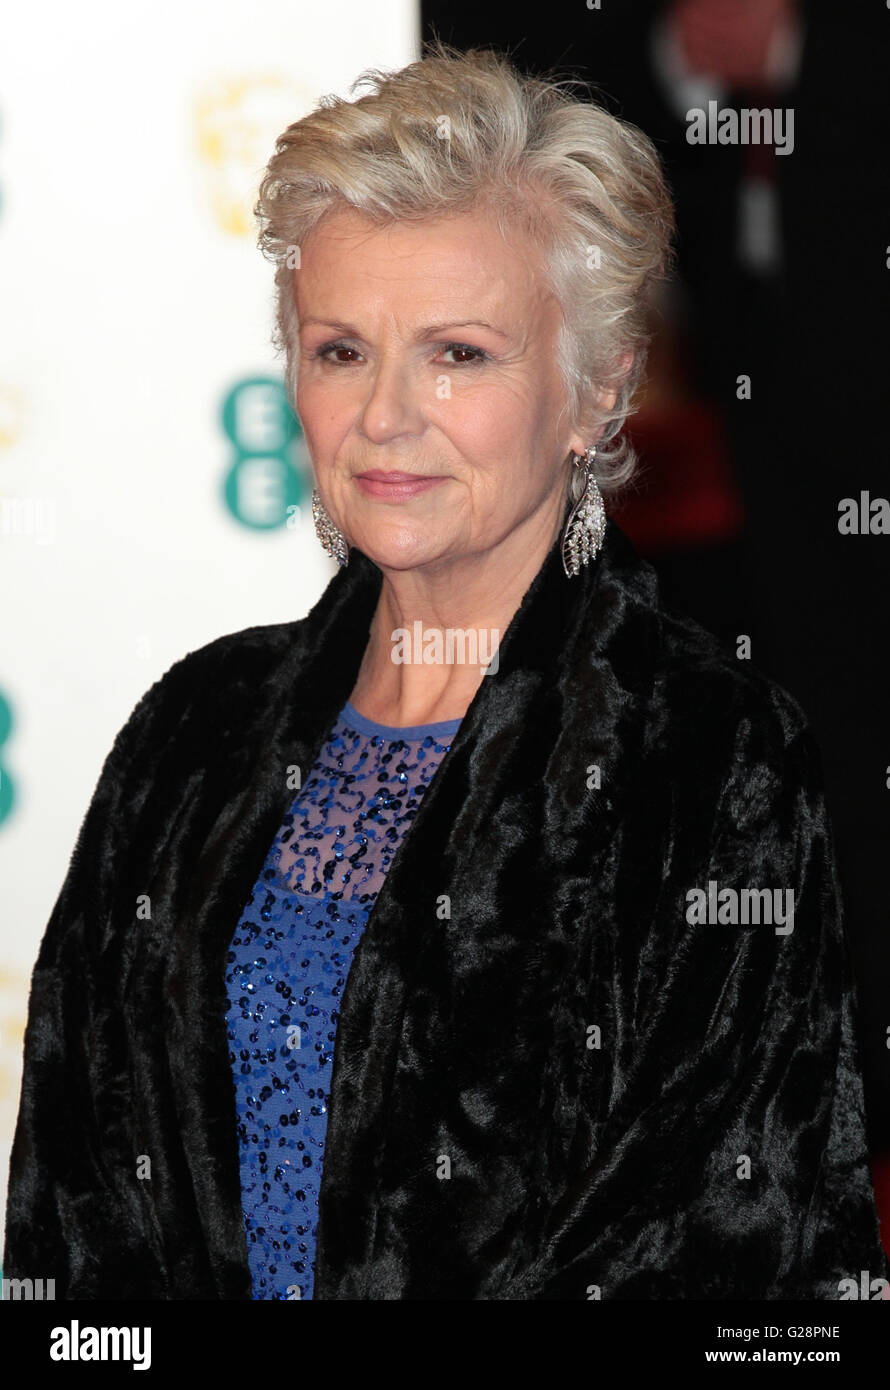 LONDON - FEB 14, 2016: Julie Walters attends the EE Bafta British Academy Film Awards at the Royal Opera House on Feb 14, 2016 in London Stock Photo